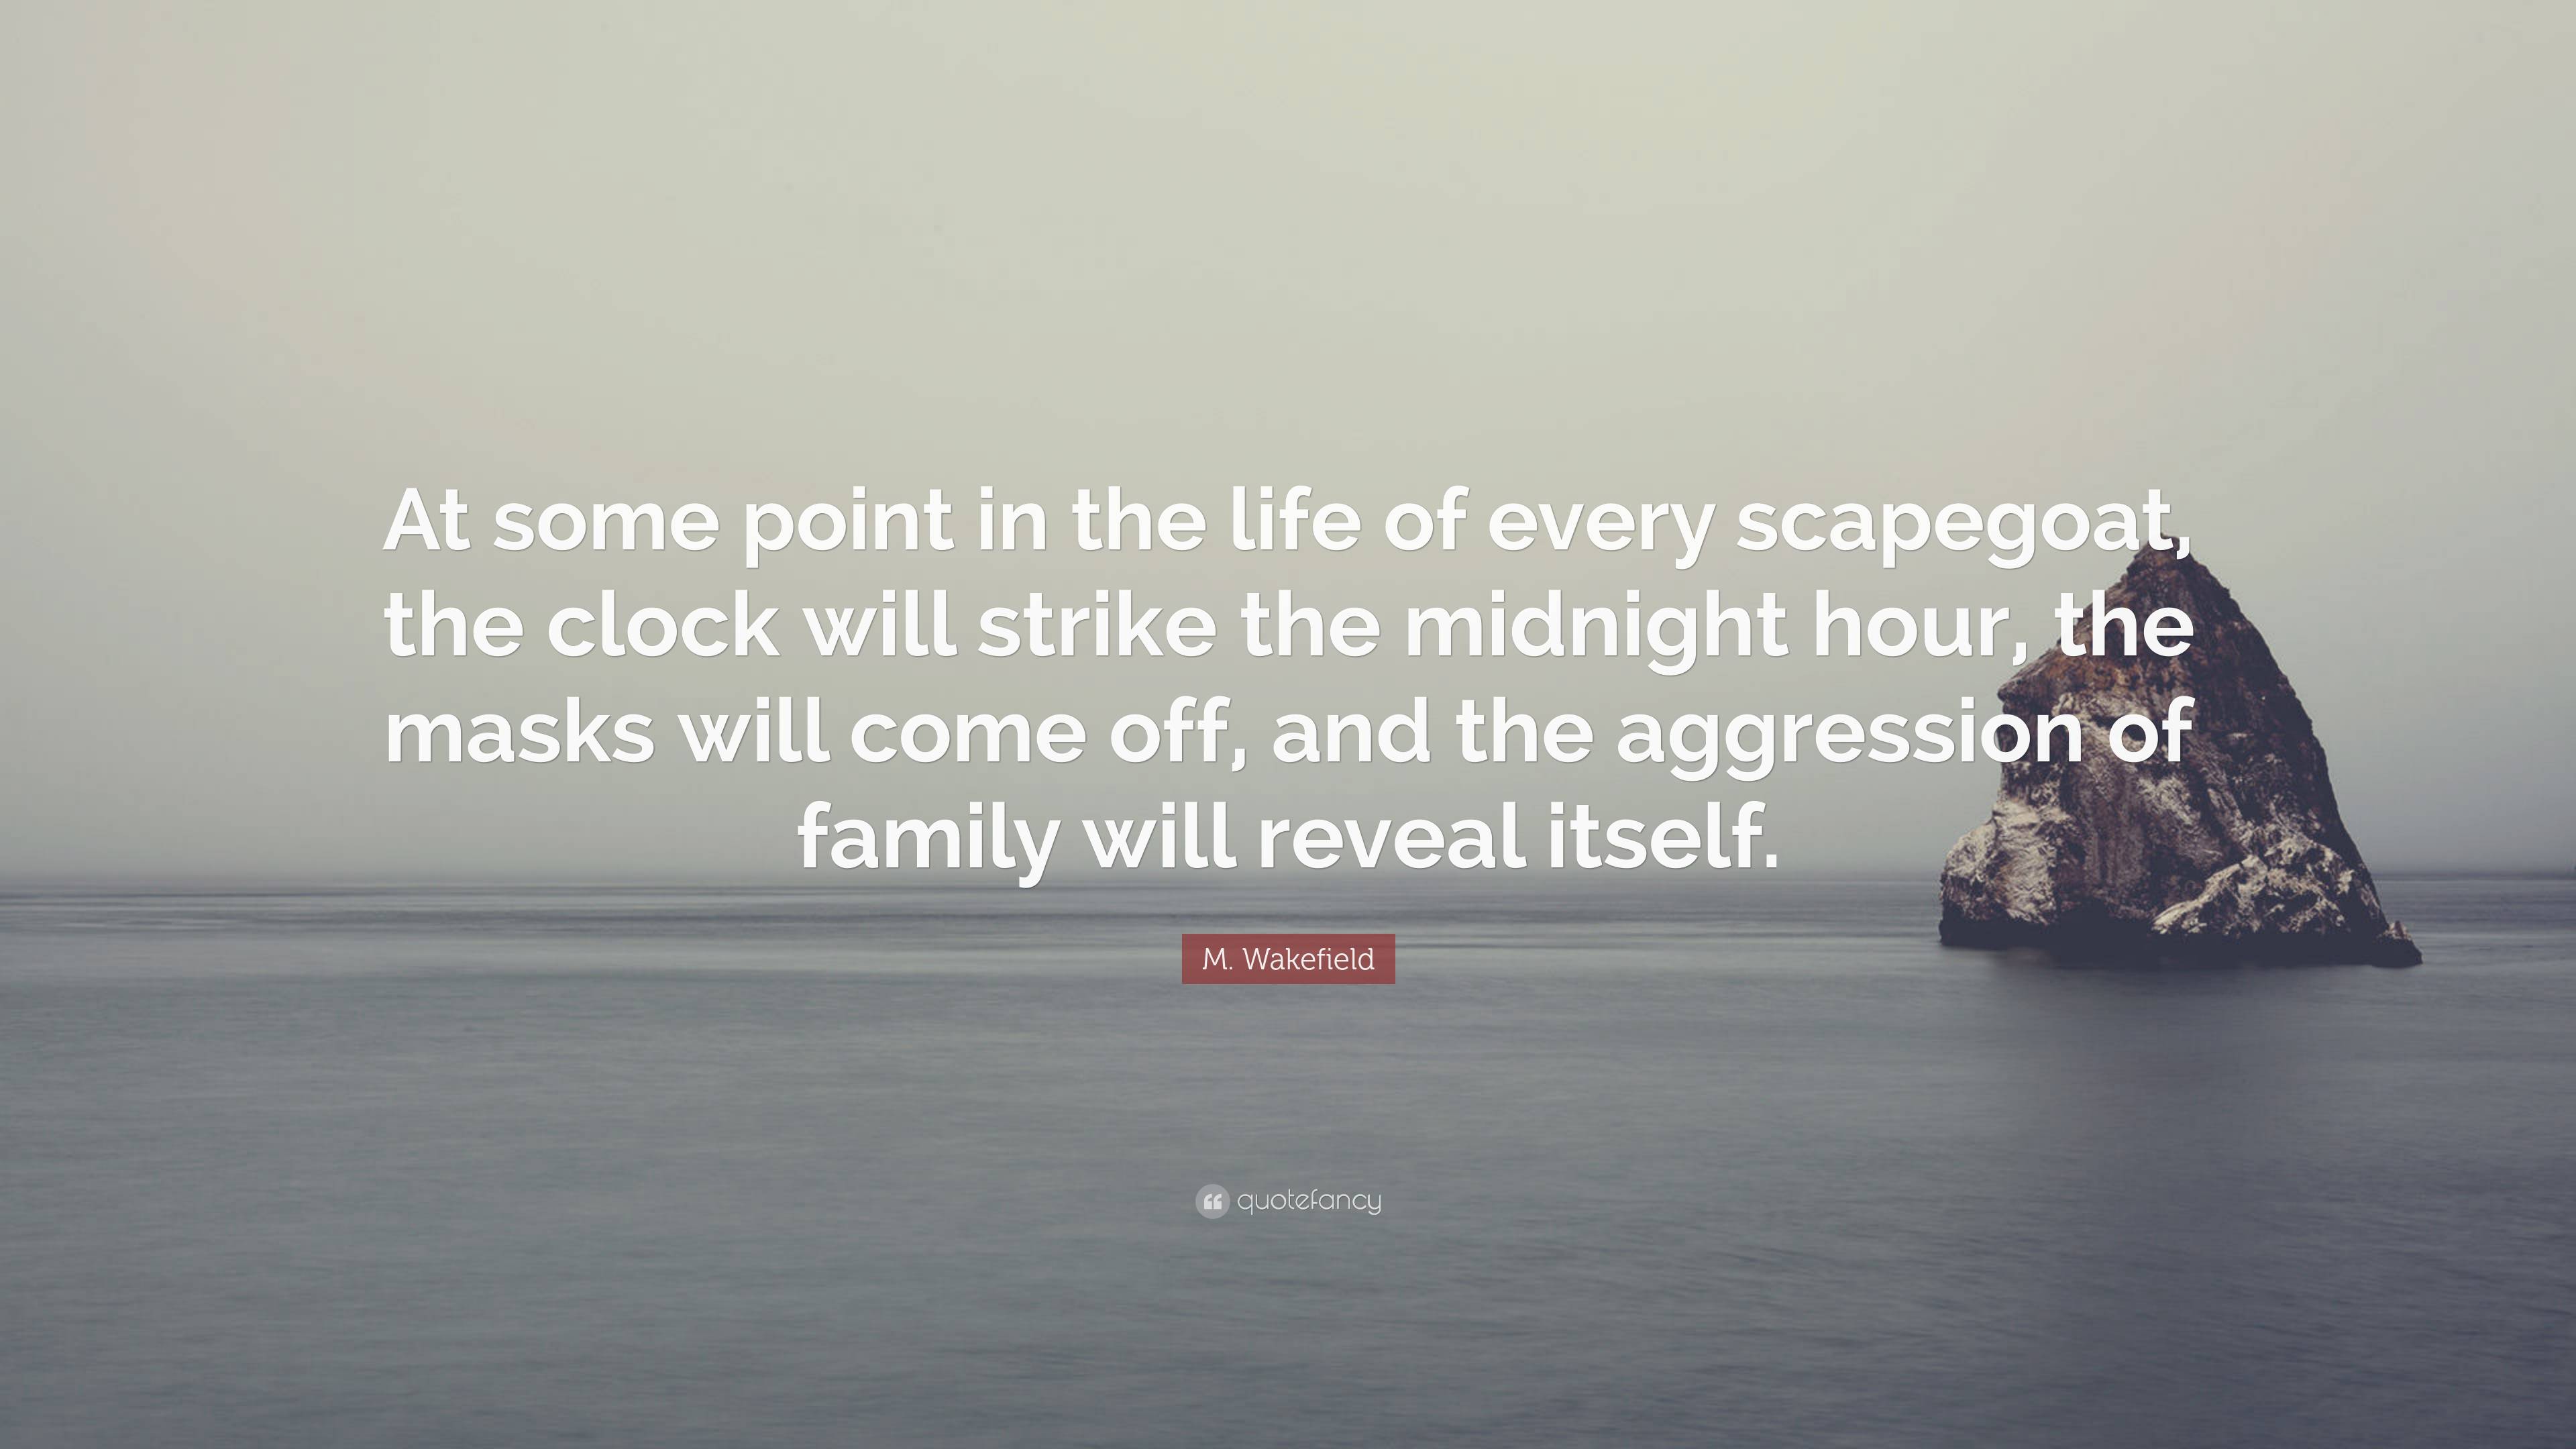 family scapegoat quotes